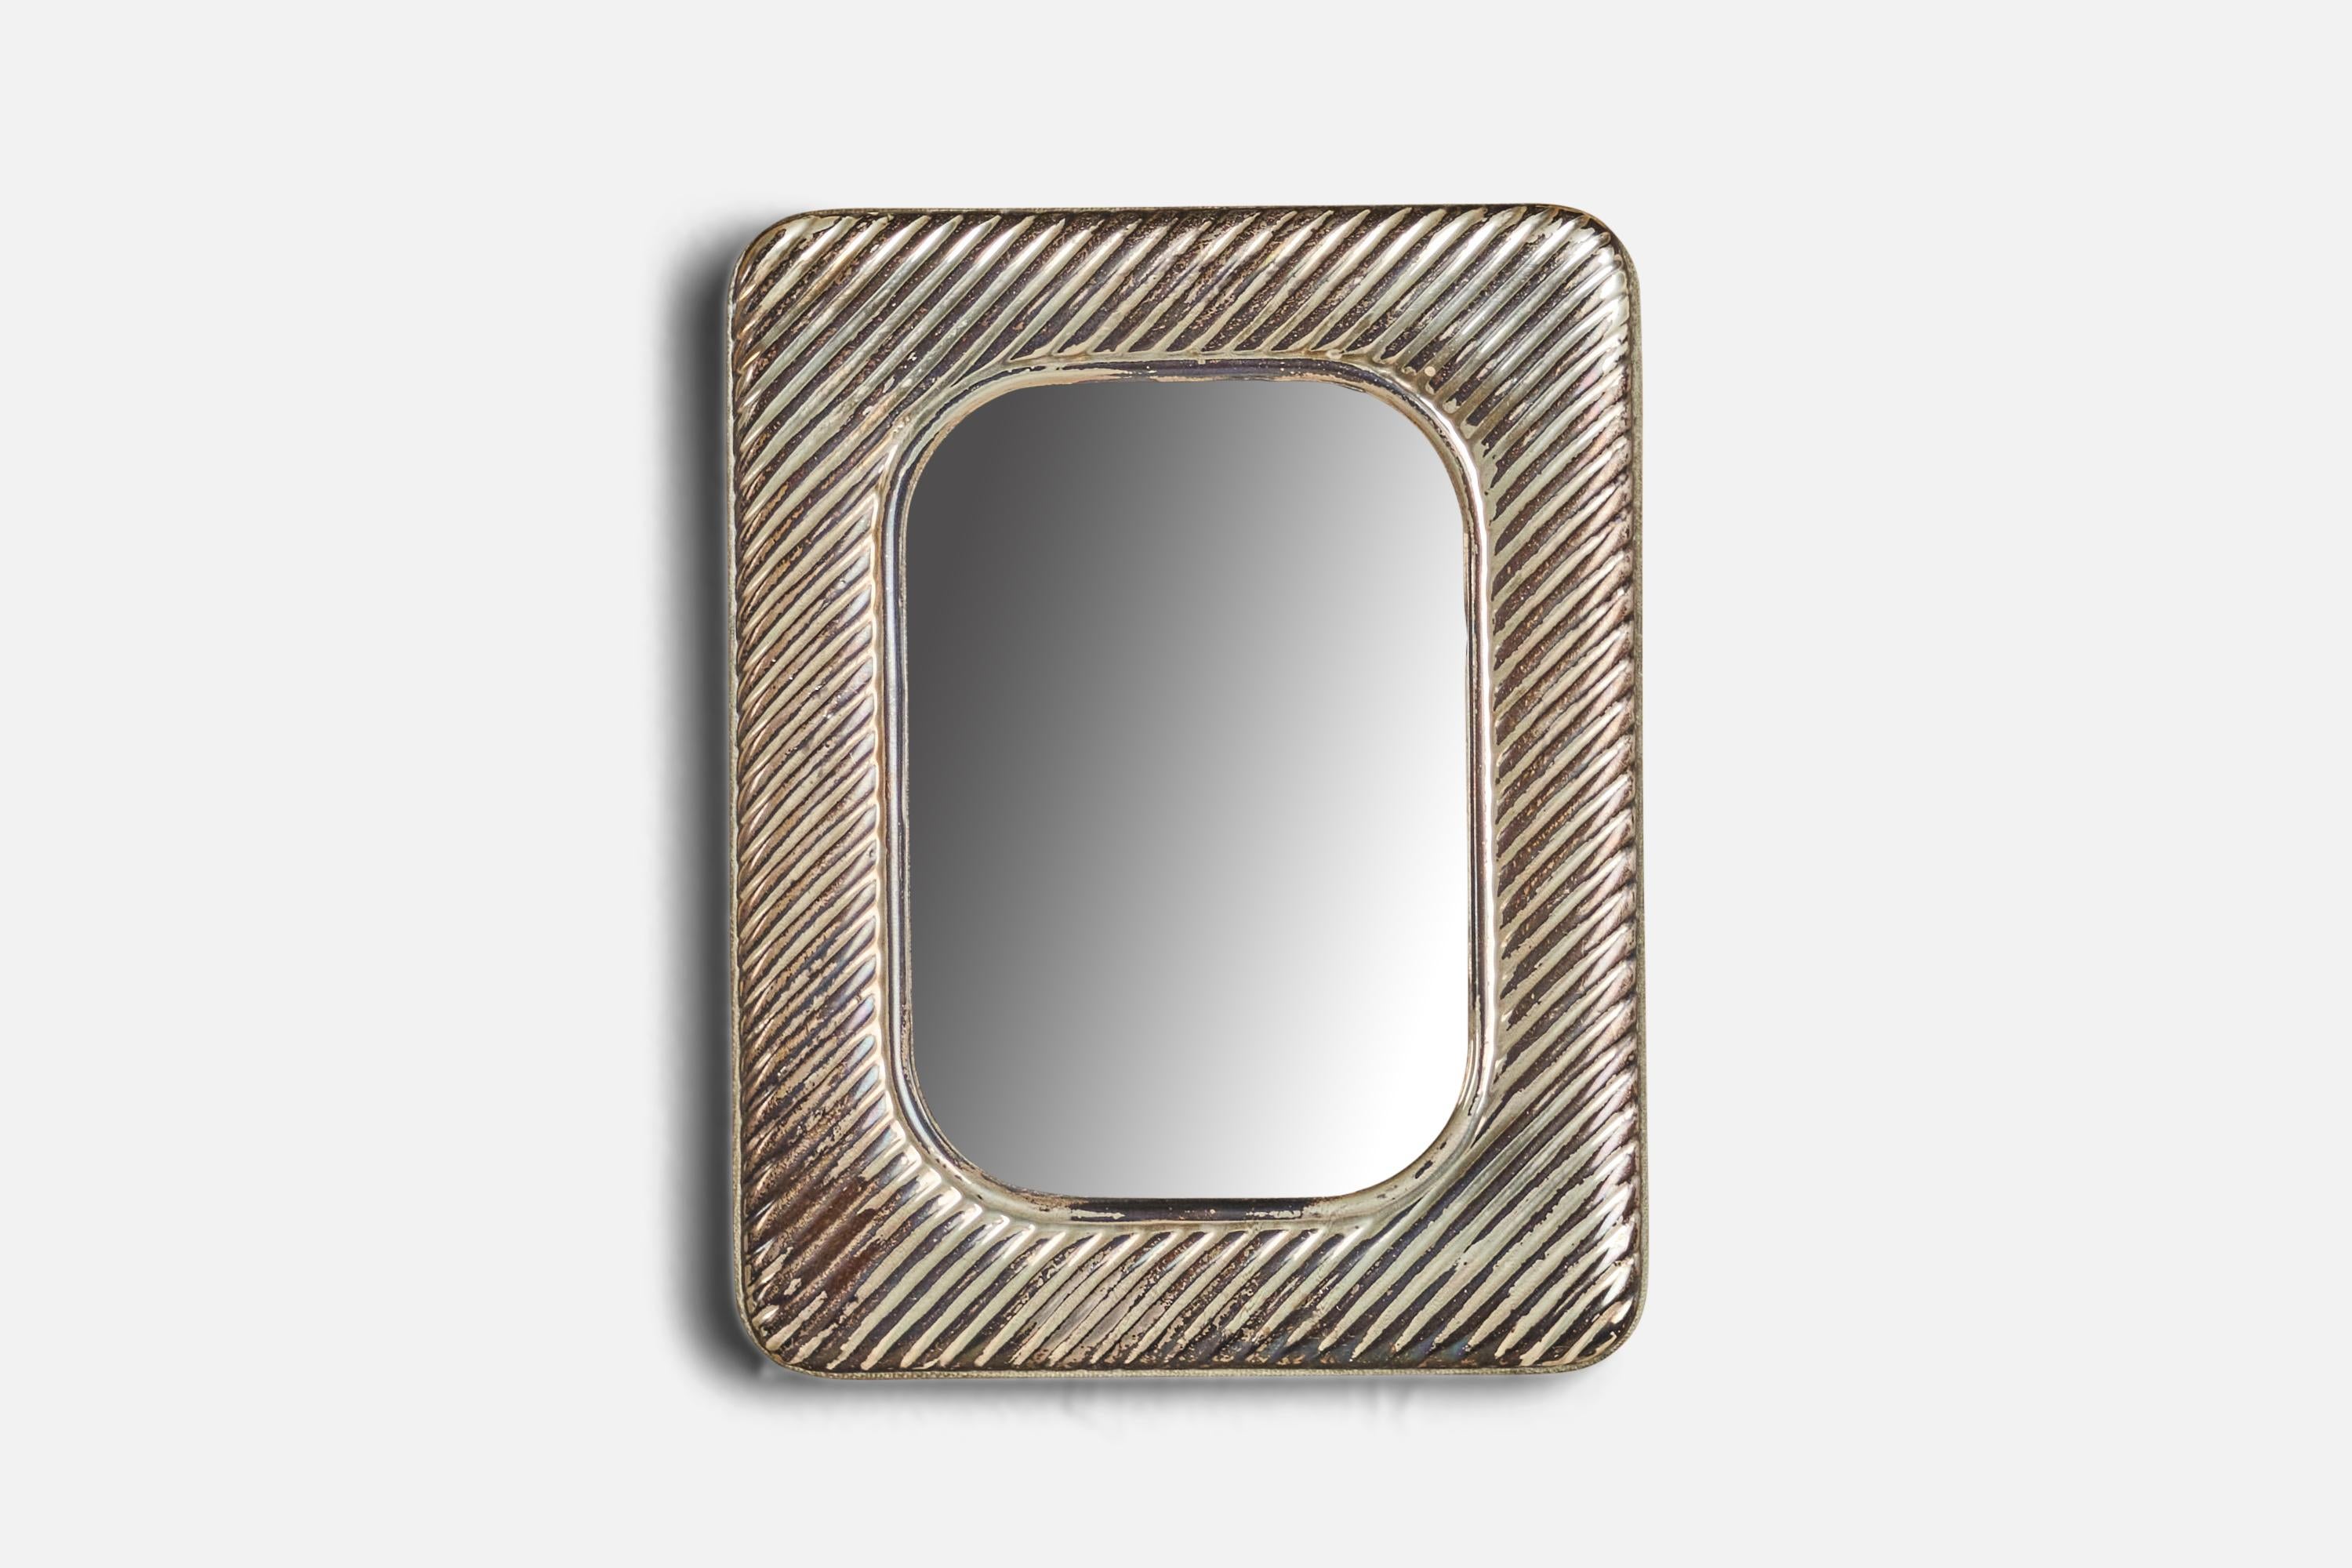 A small sterling silver wall mirror designed and produced in Italy, 1940s.